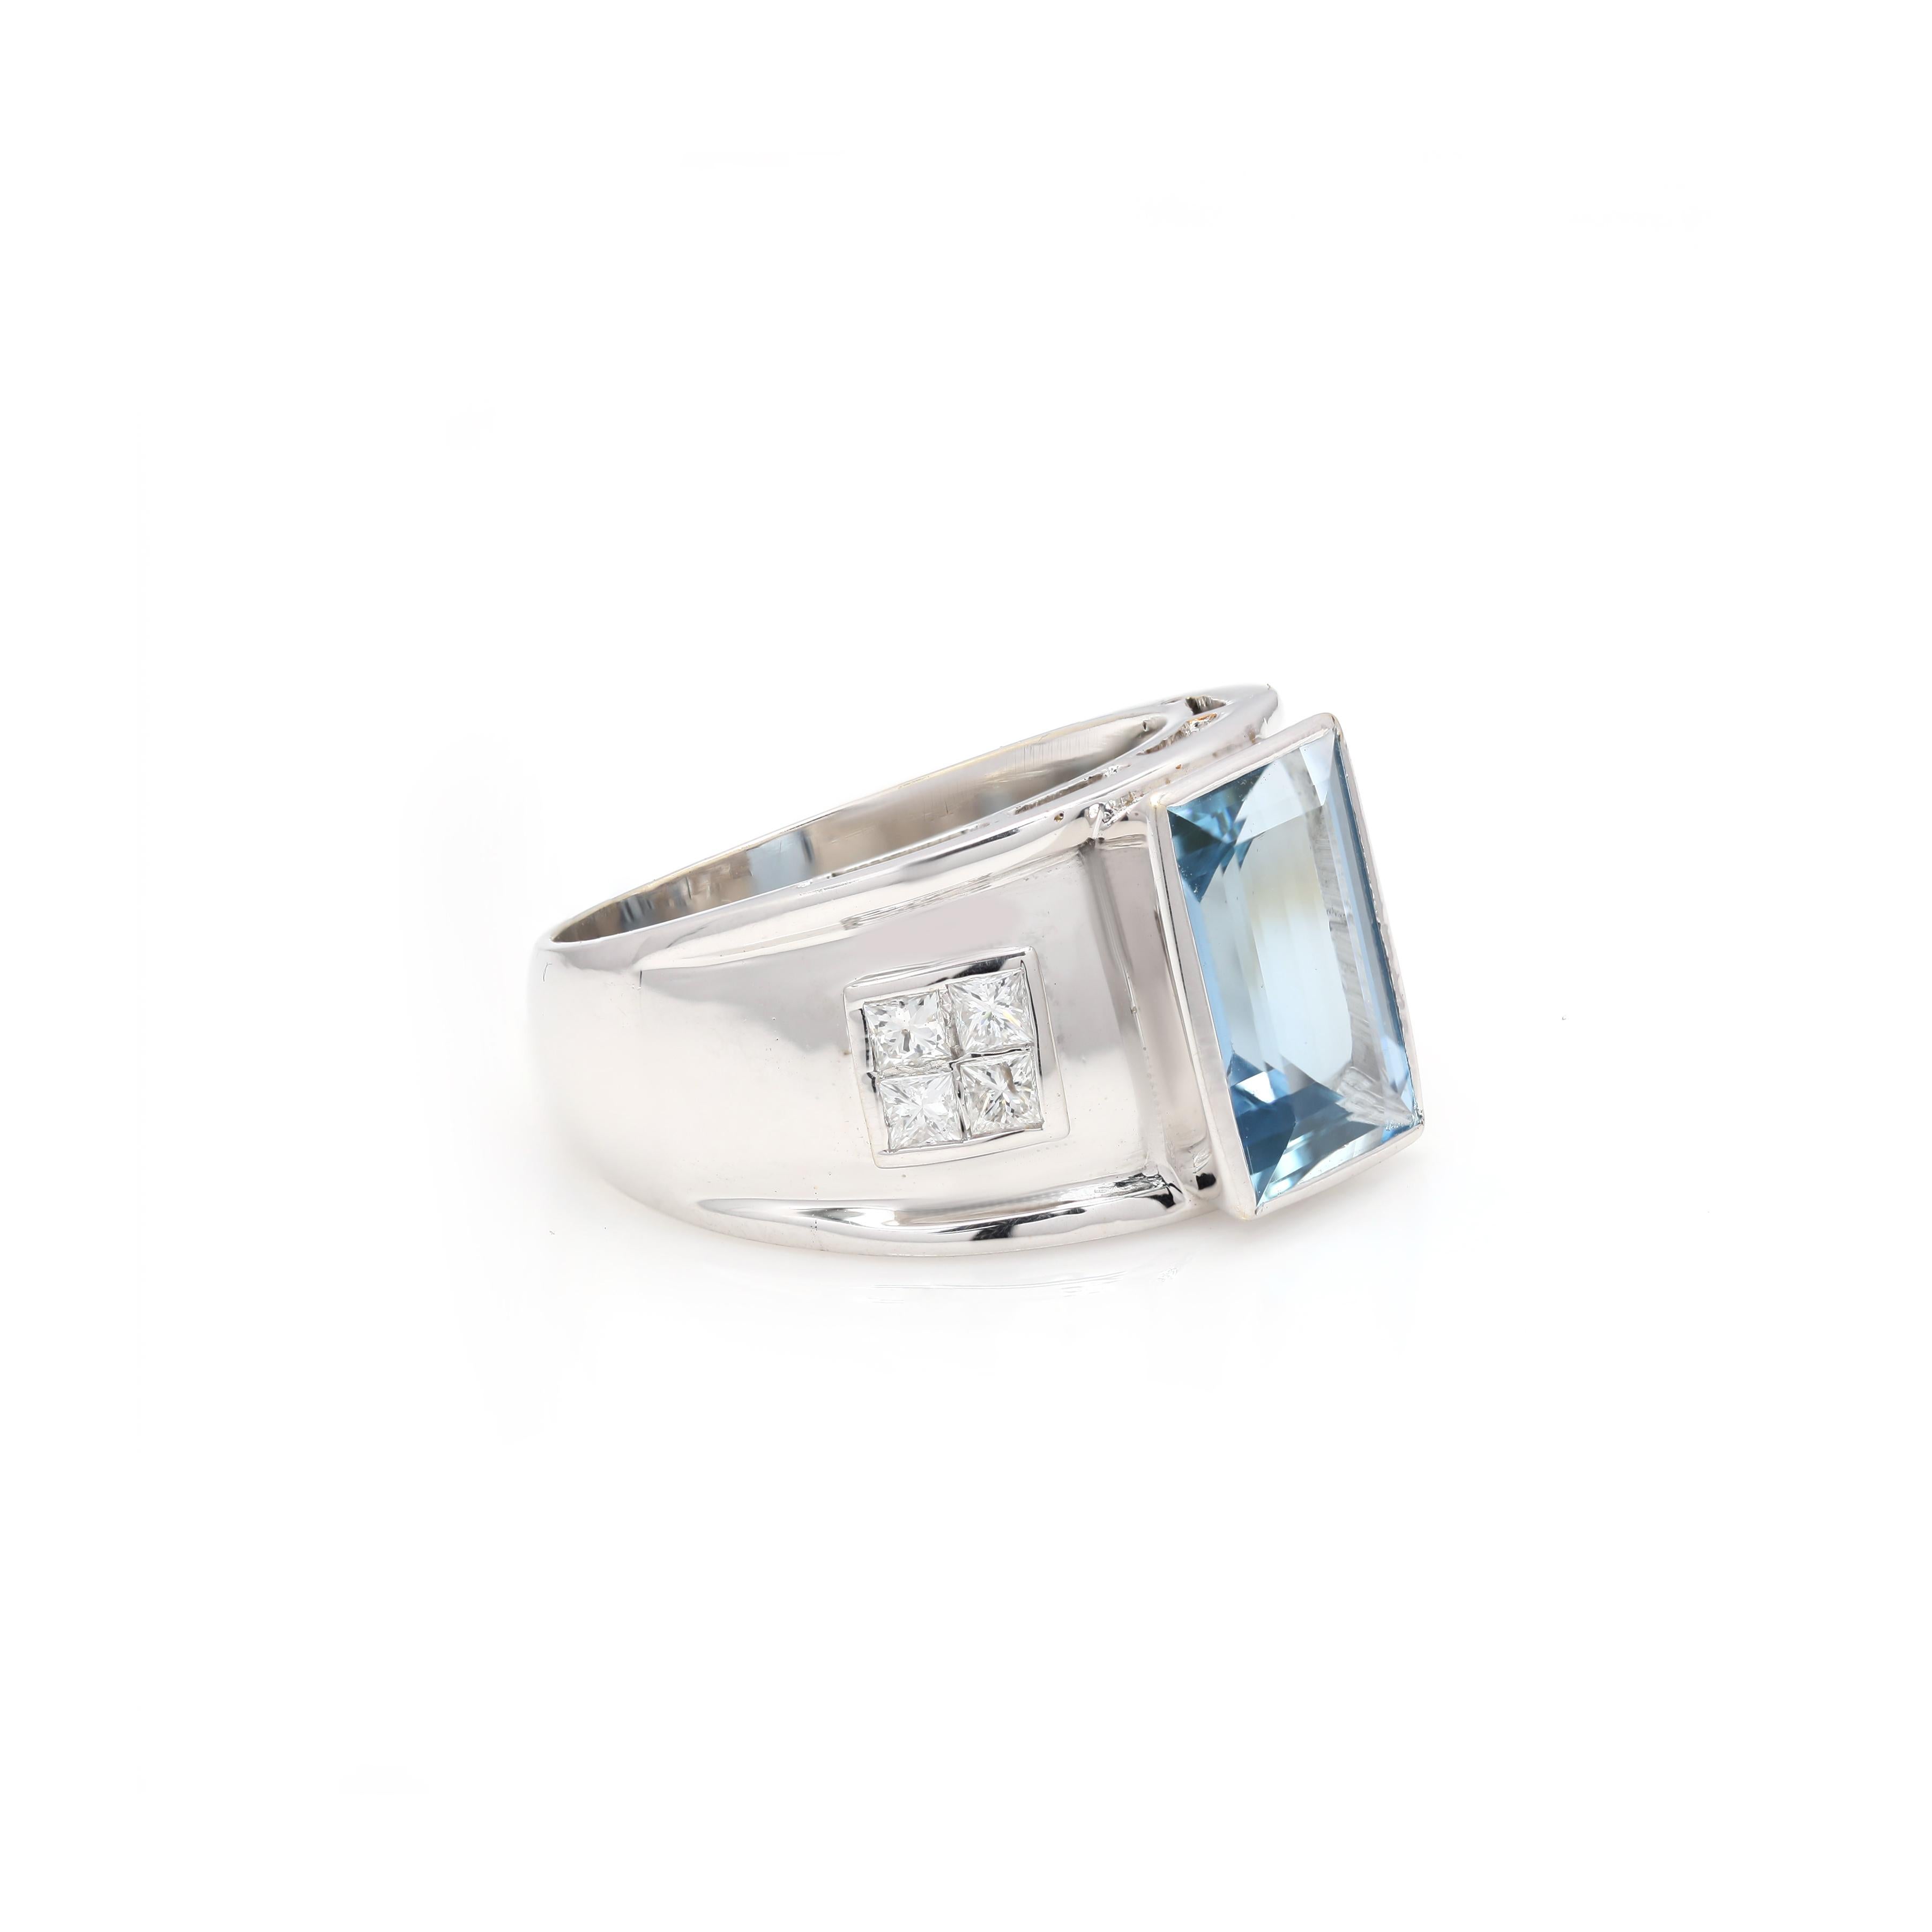 For Sale:  5.6 Carat Aquamarine Bold Men's Ring with Diamonds in 18K White Gold 2